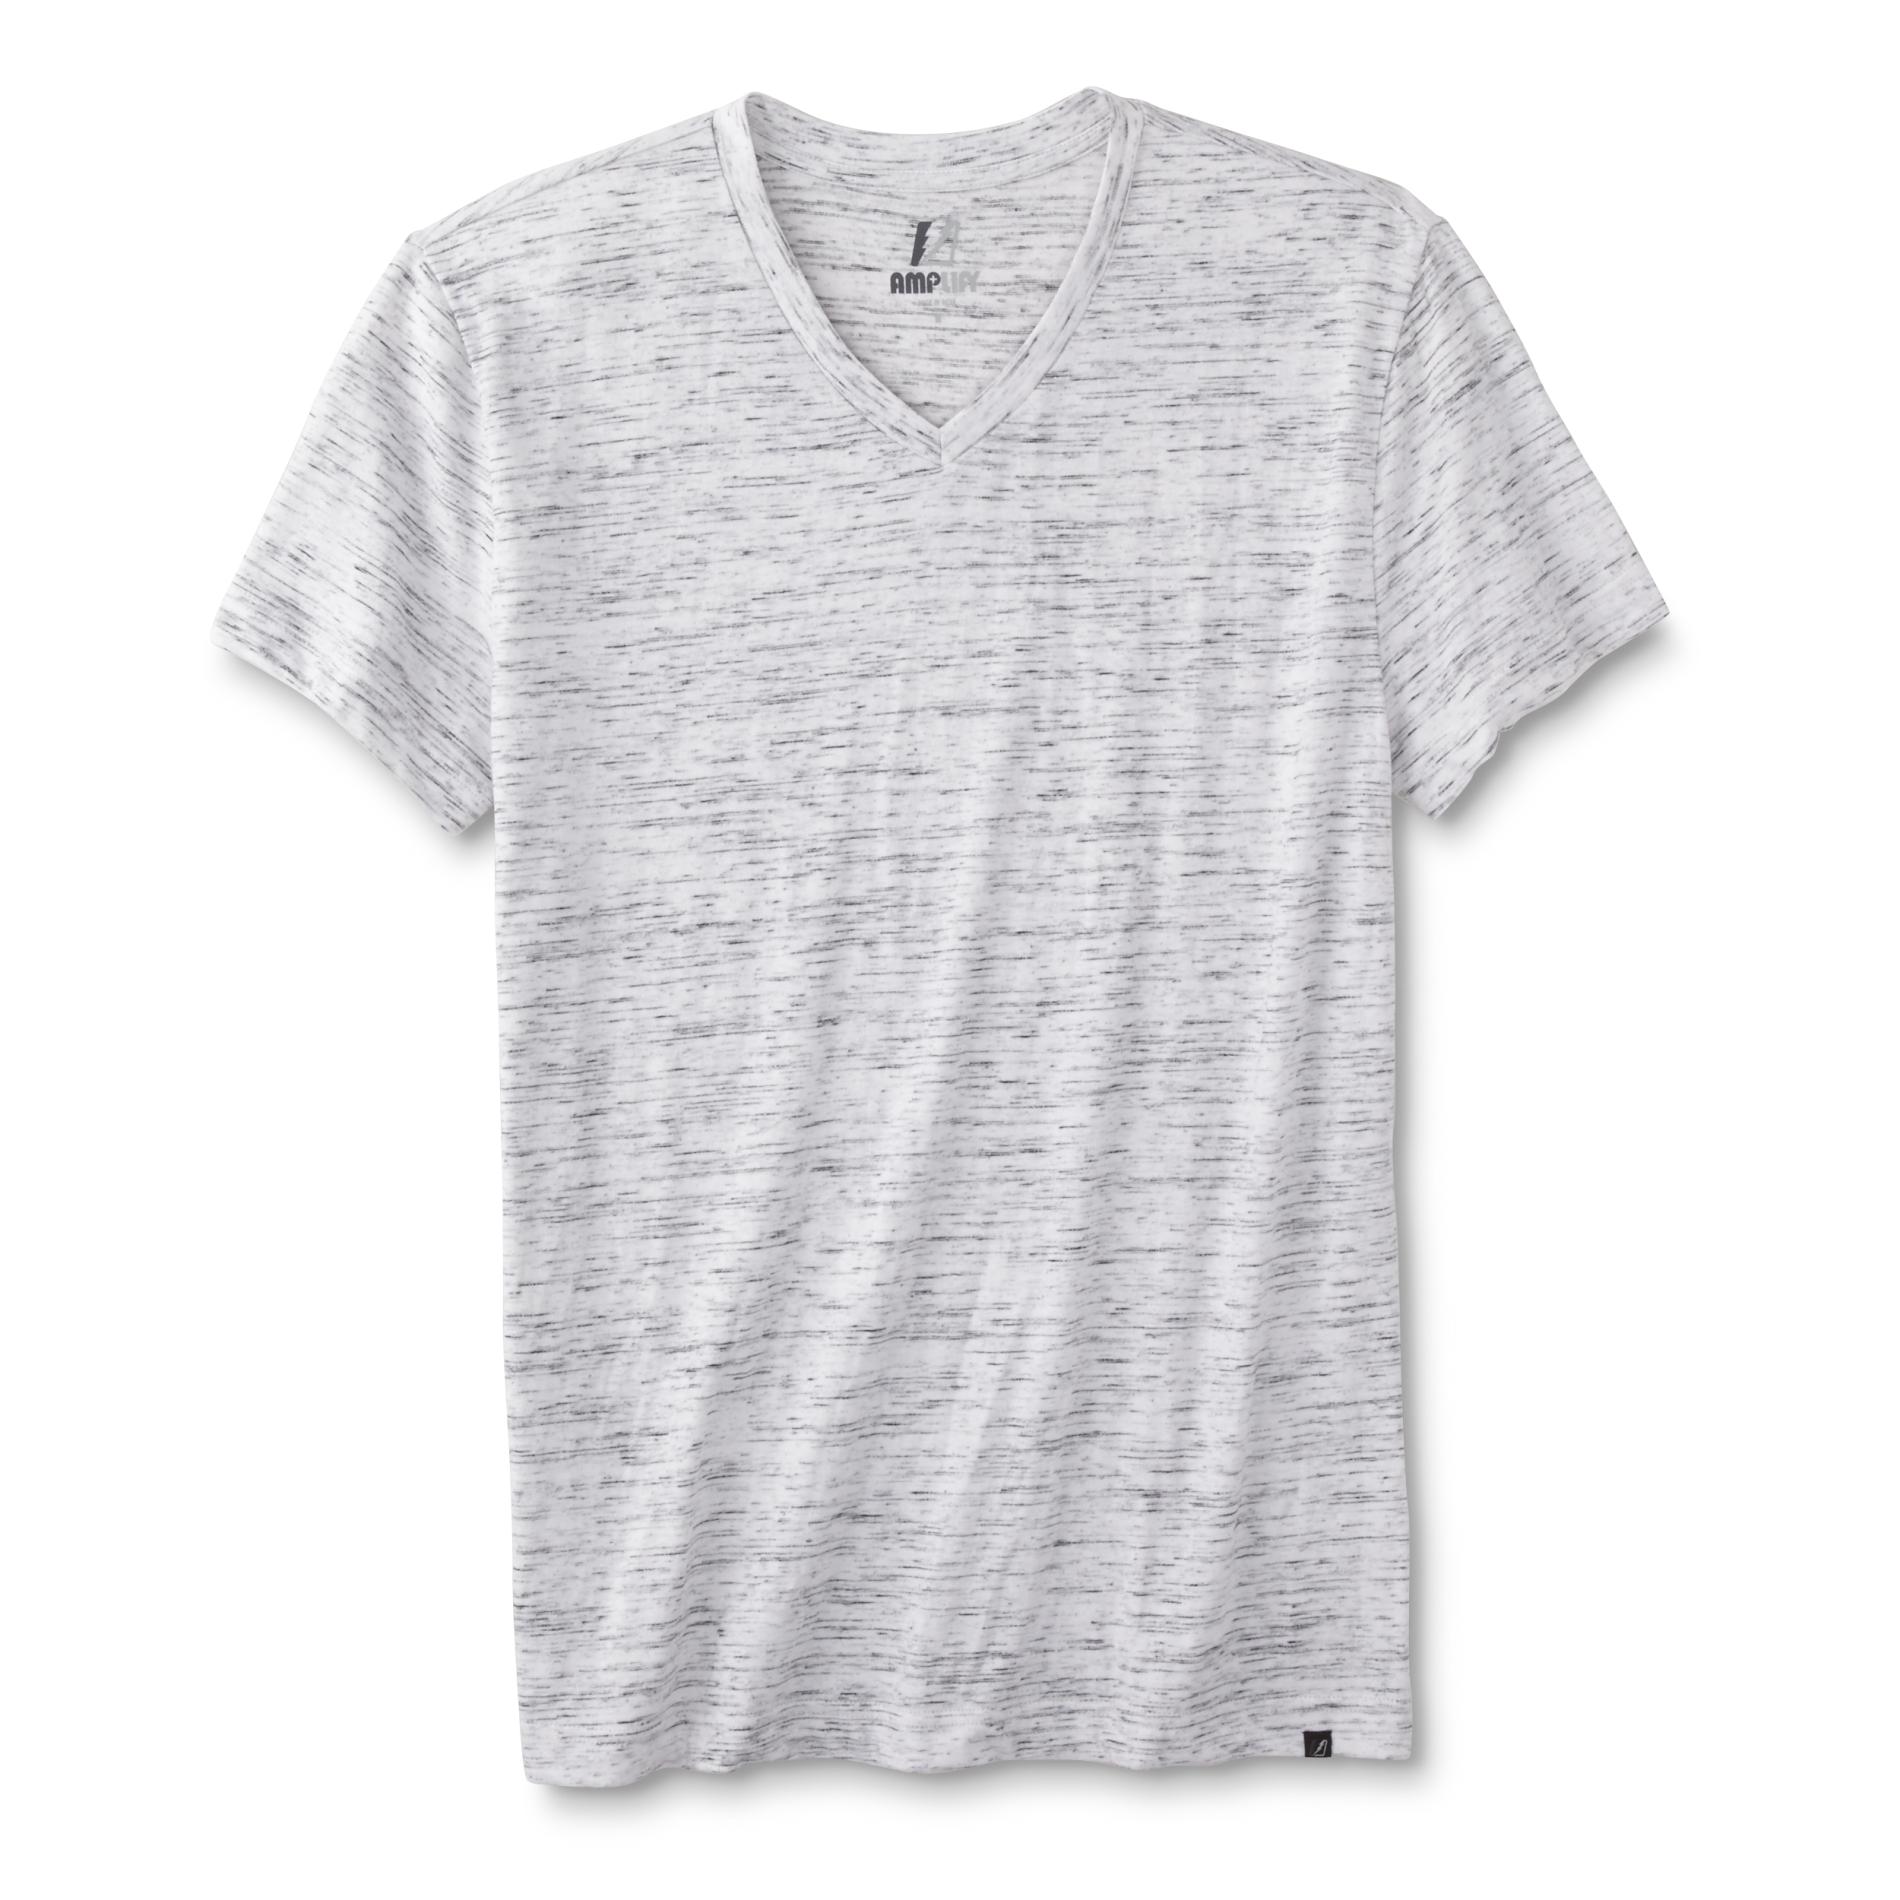 Amplify Young Men's V-Neck T-Shirt - Space-Dyed